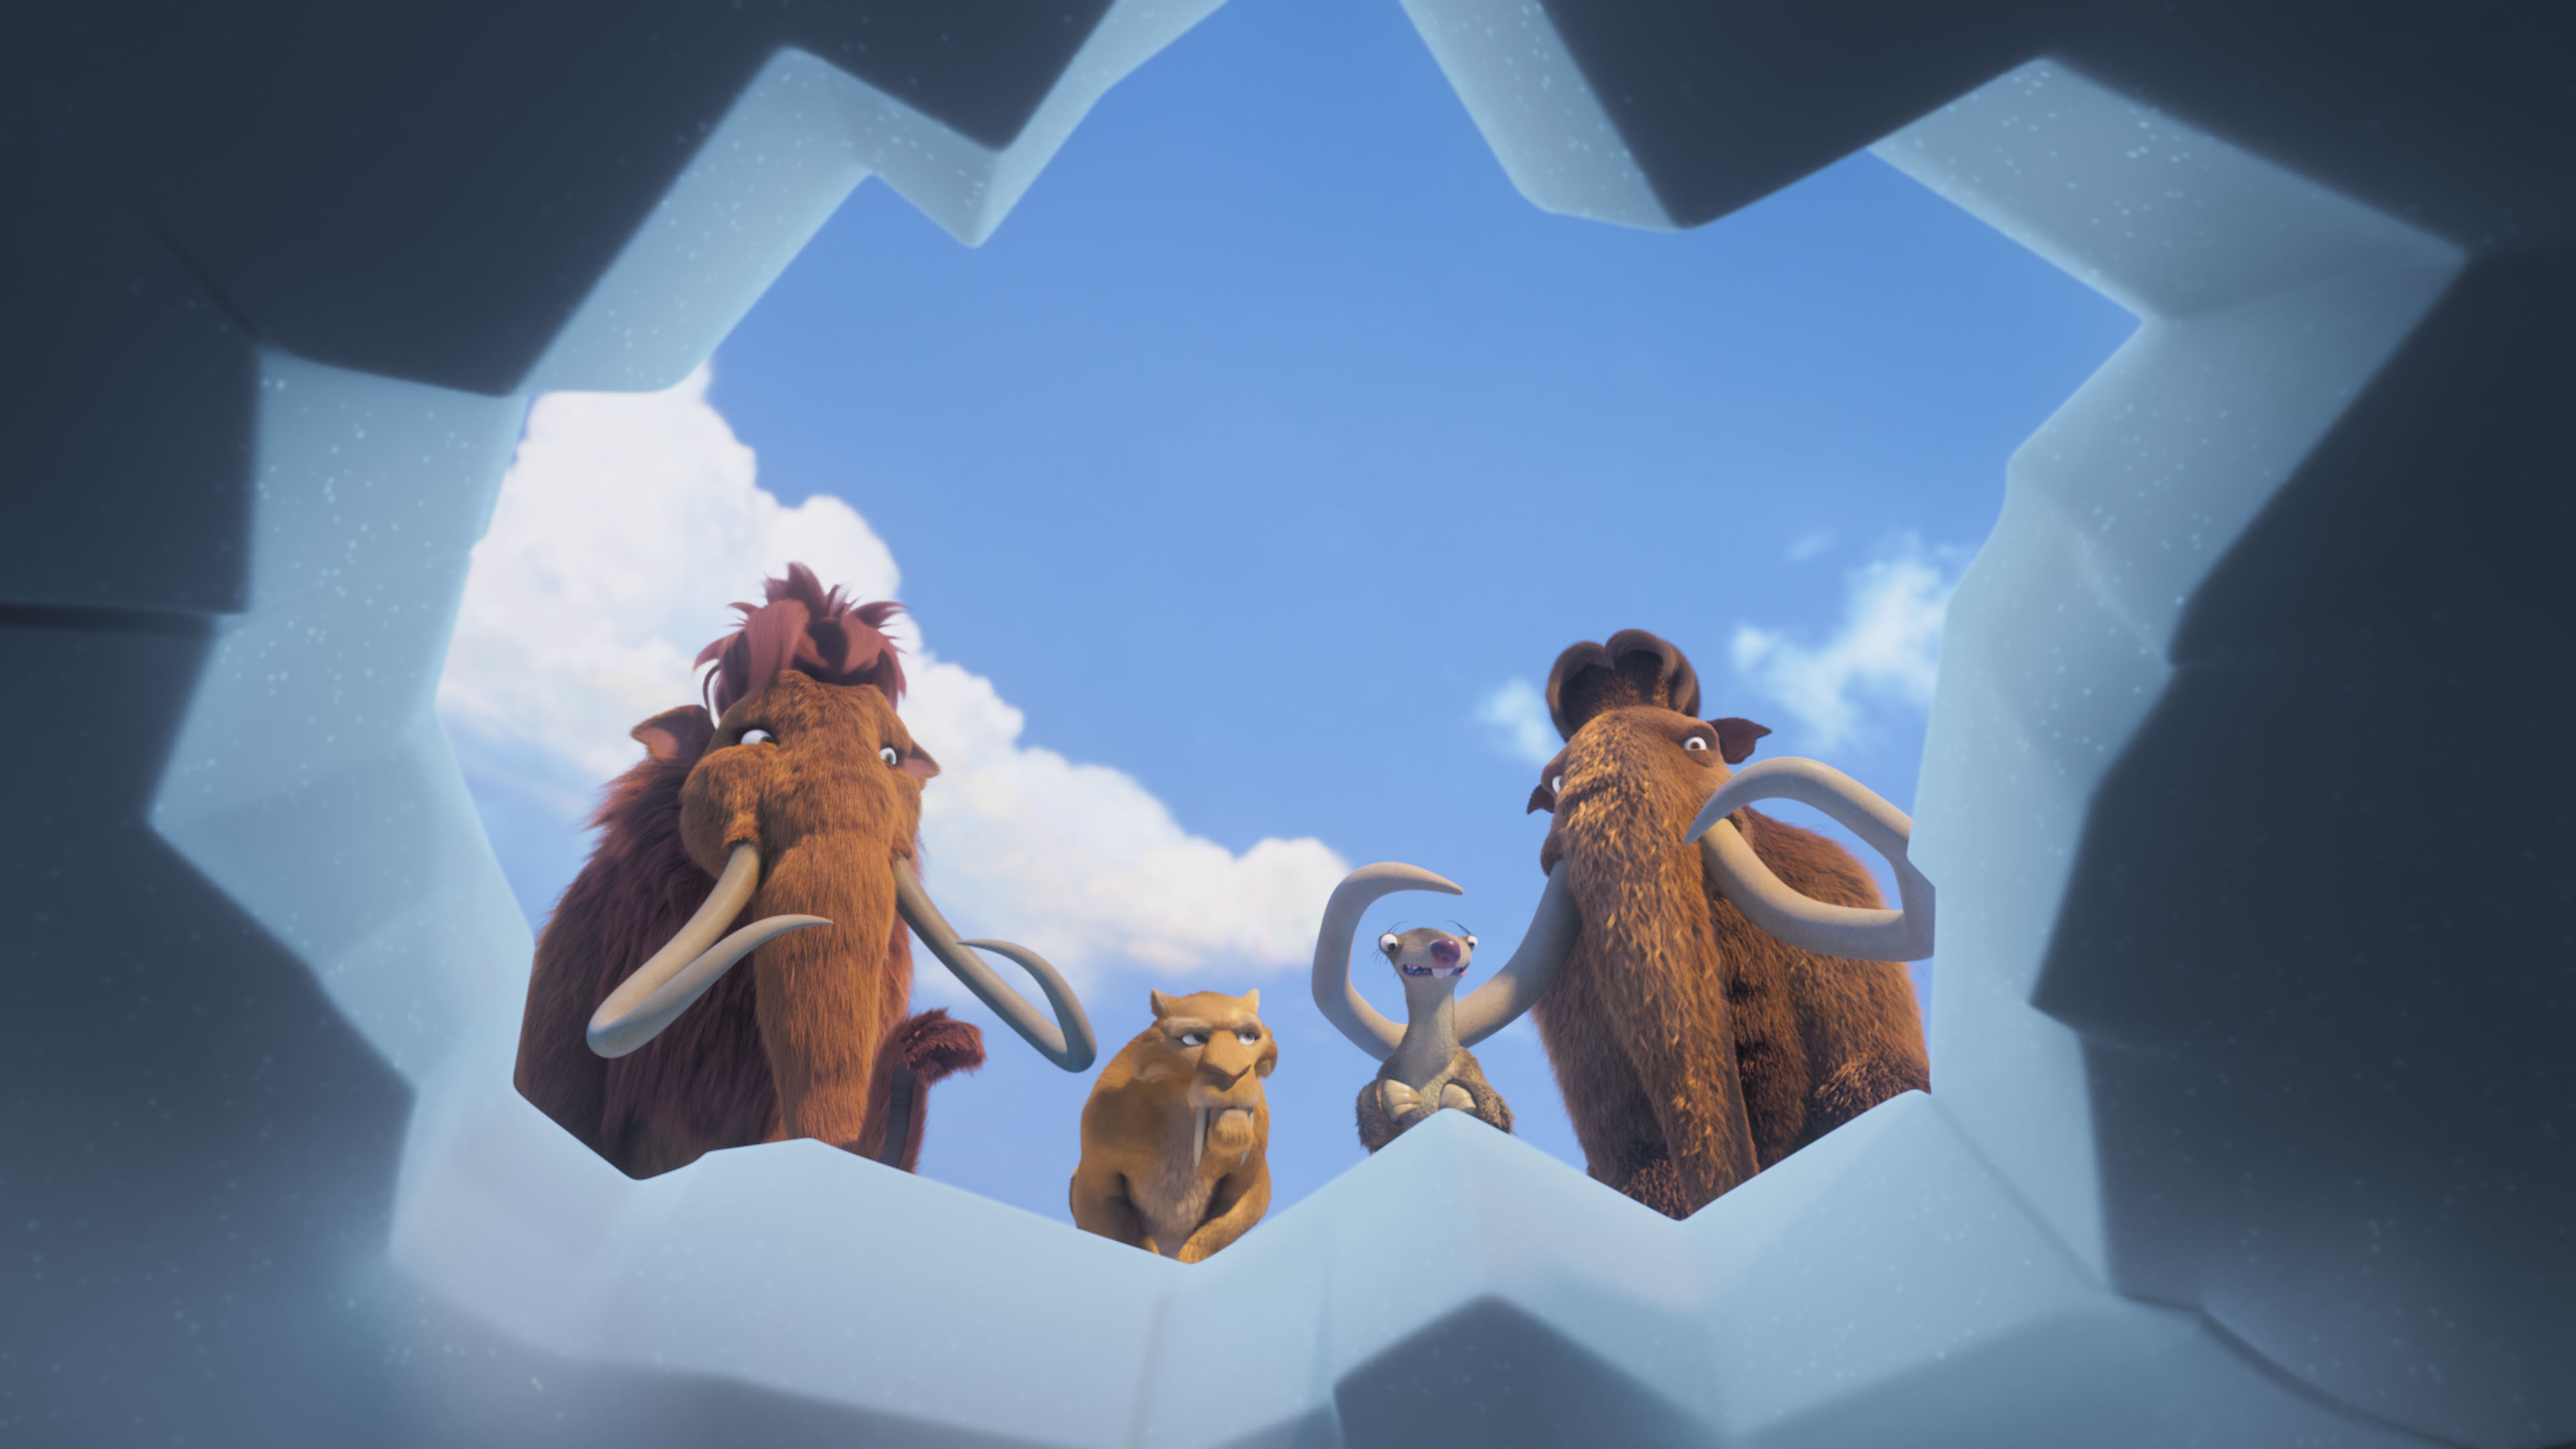 Tell Us Why Ice Age Still Goes Hard 20 Yrs On & We Might Sling U Tix To See It At The Drive-In